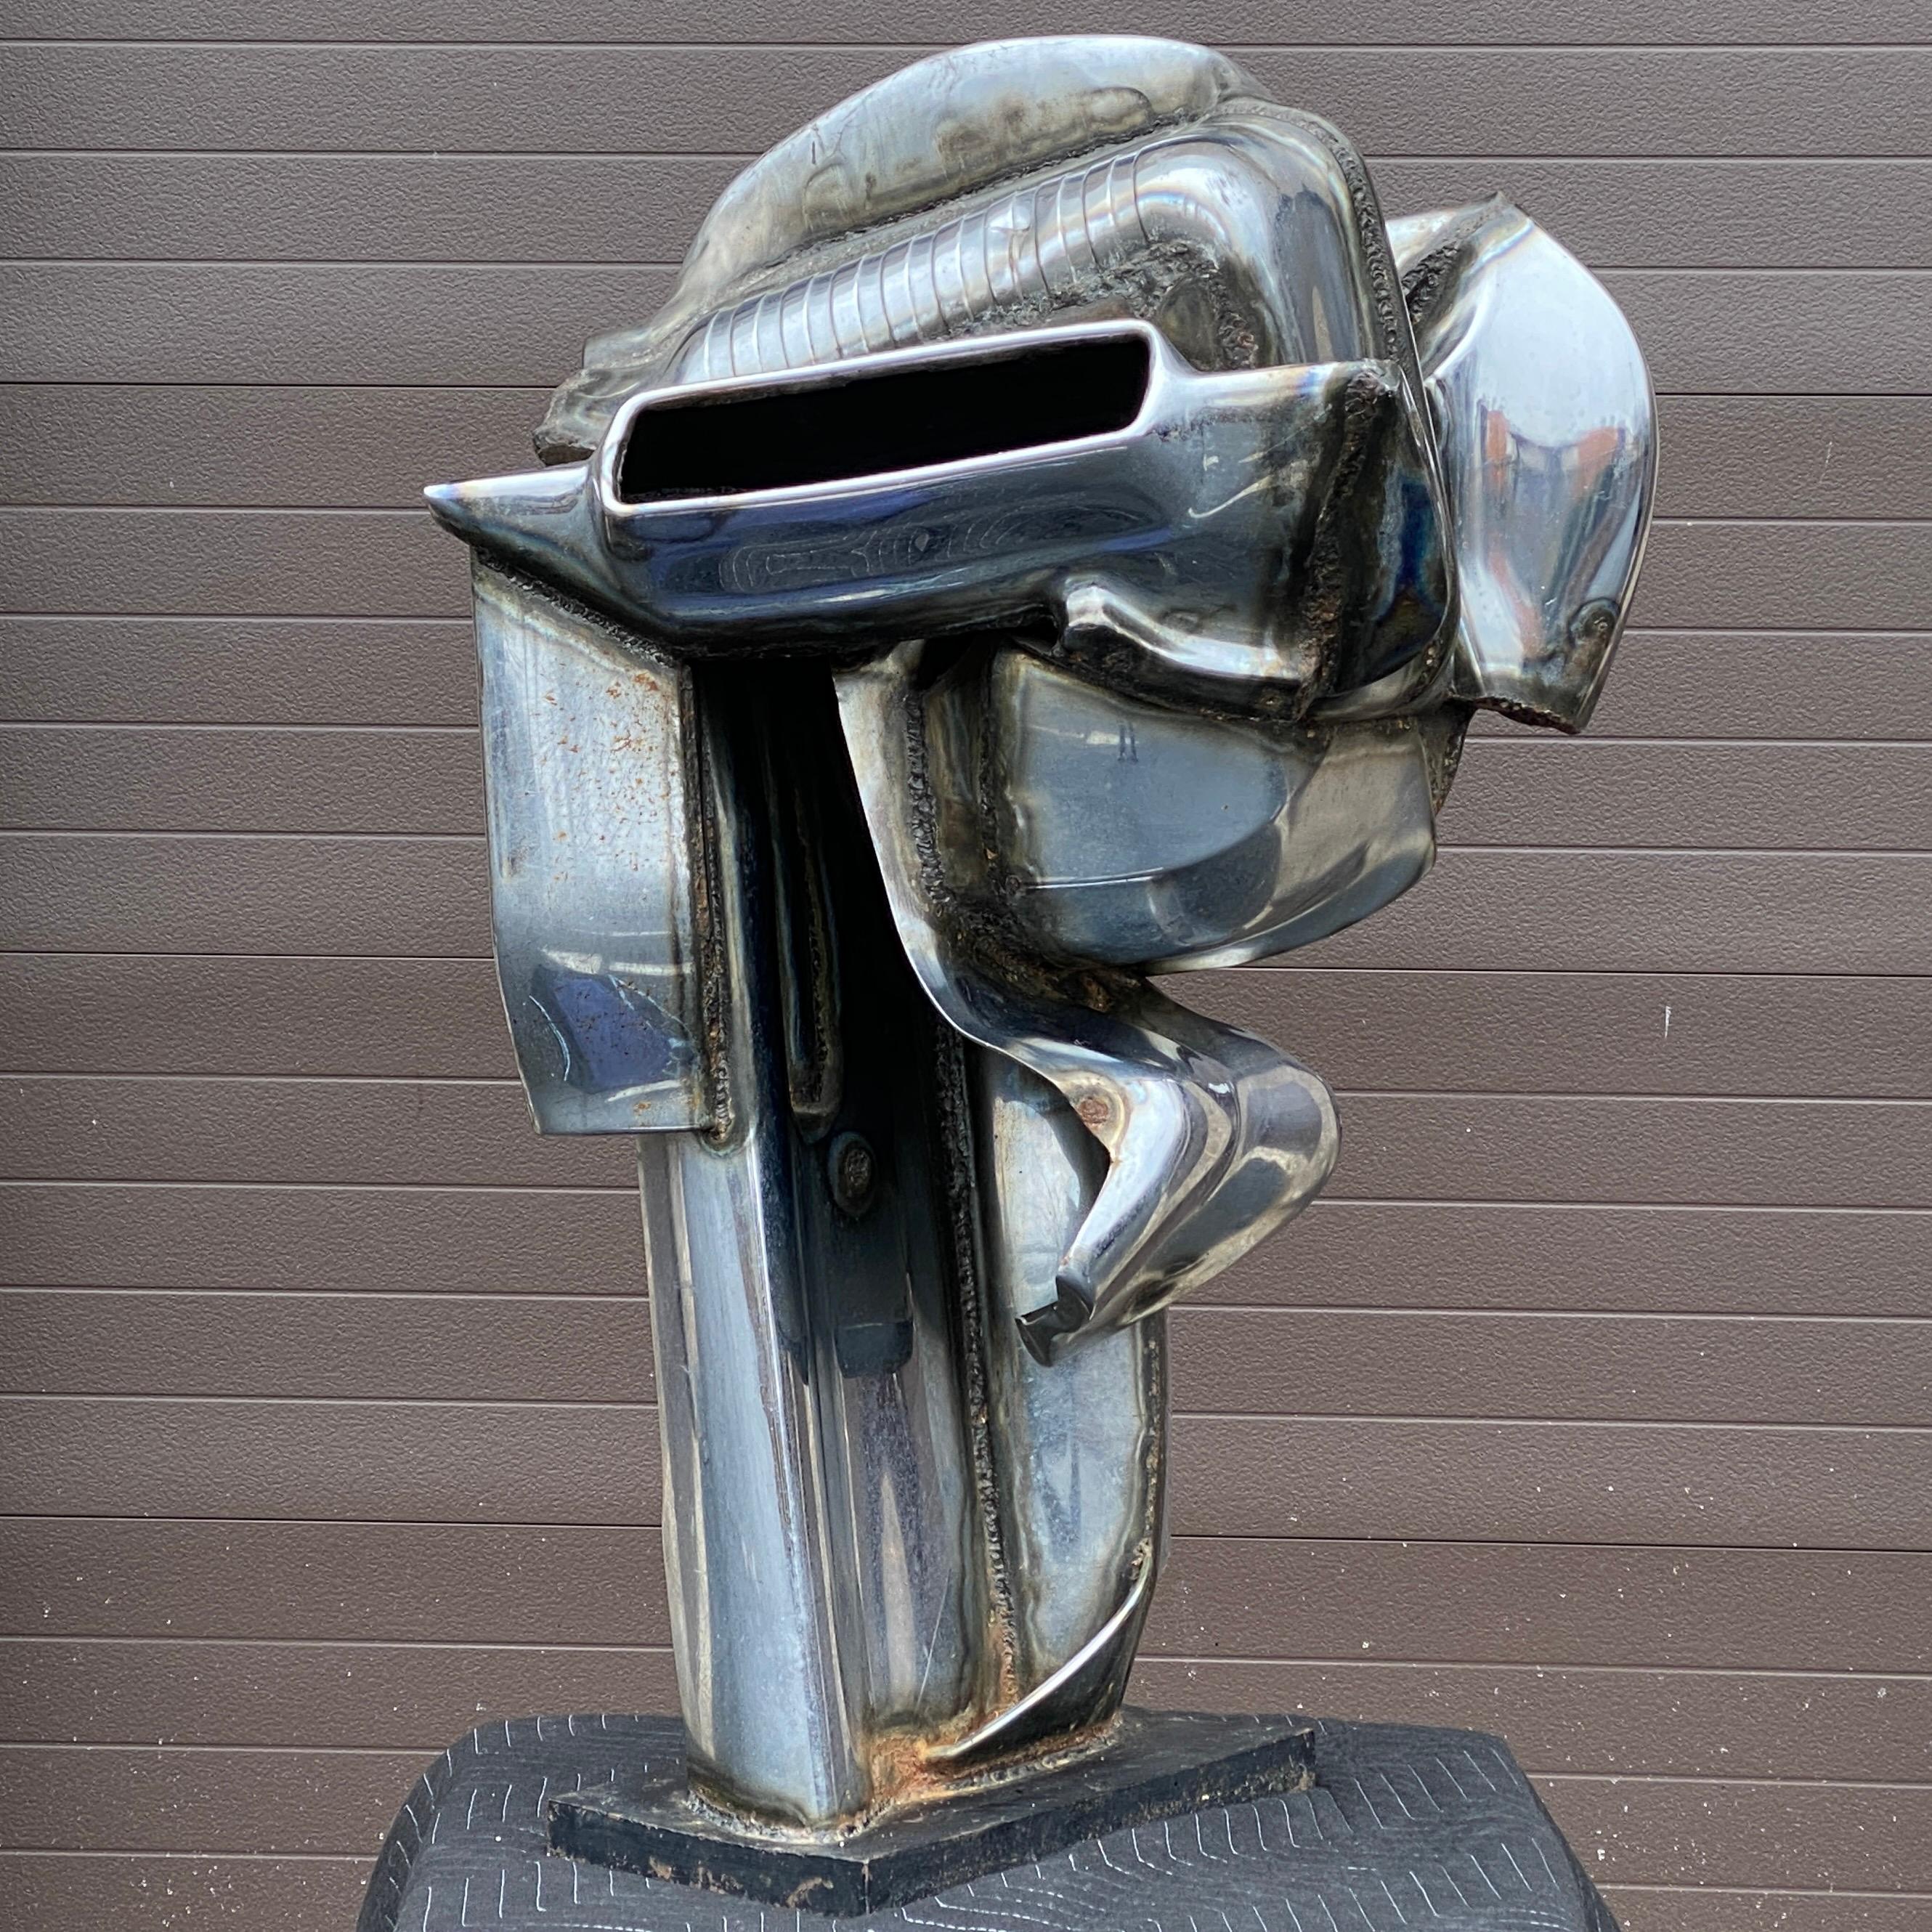 Brutalist Welded Chrome Automobile Bumper Abstract Sculpture by Jason Seley, '1919-1983' For Sale